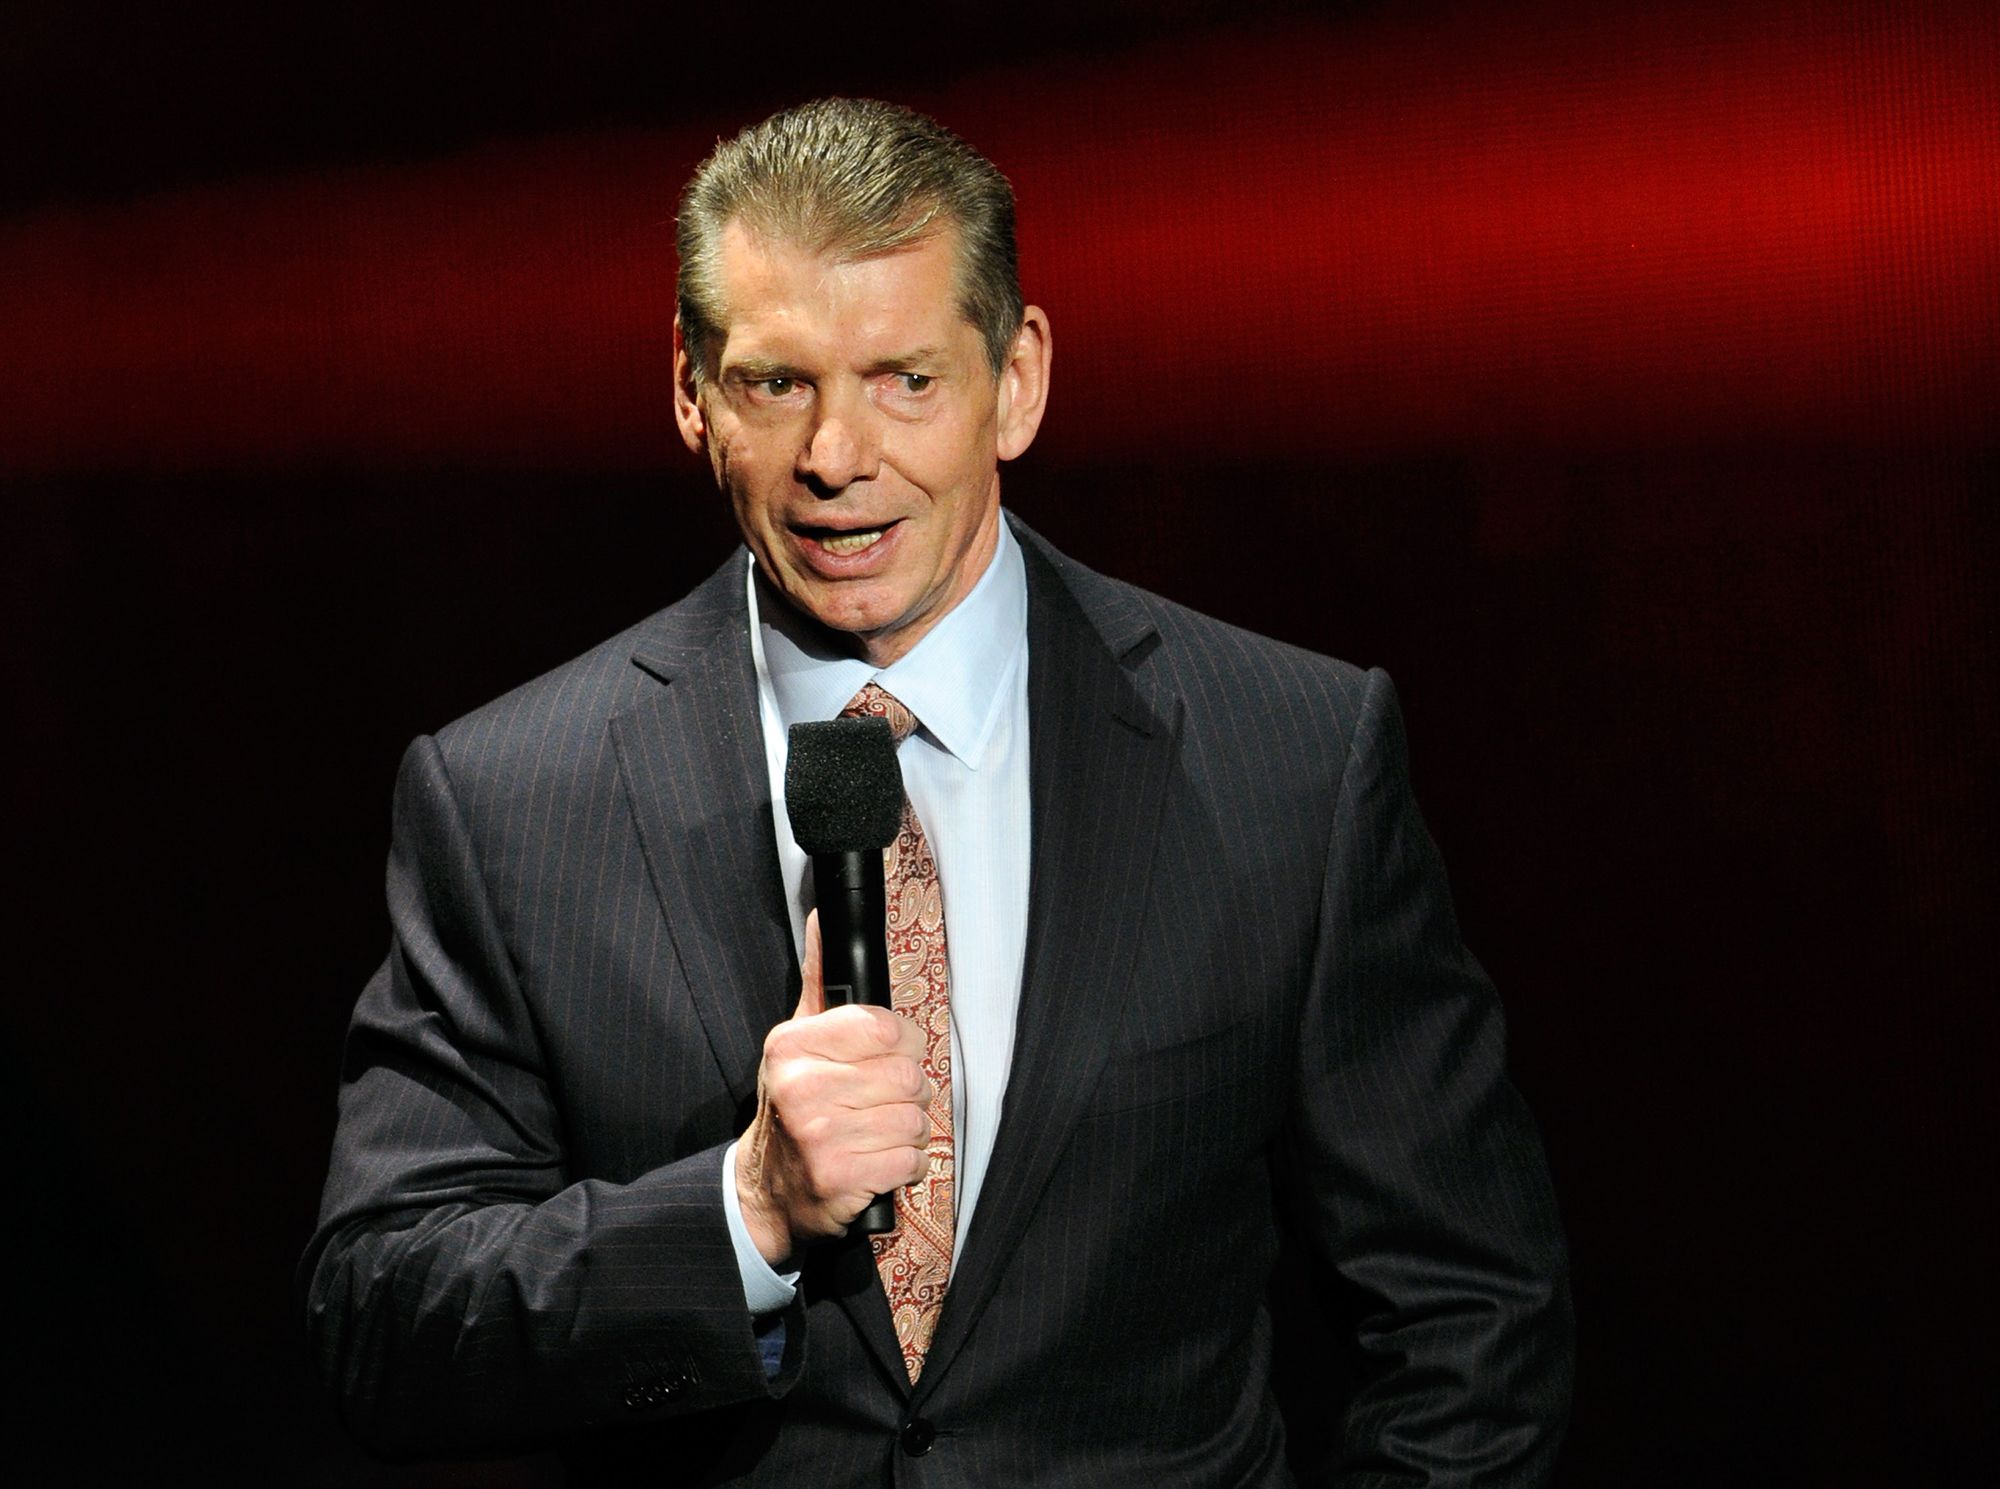 Aprilia Wwe Stephanie Mcmahon X Videos - WWE boss Vince McMahon reportedly paid $3 million in hush money to cover up  affair | CNN Business